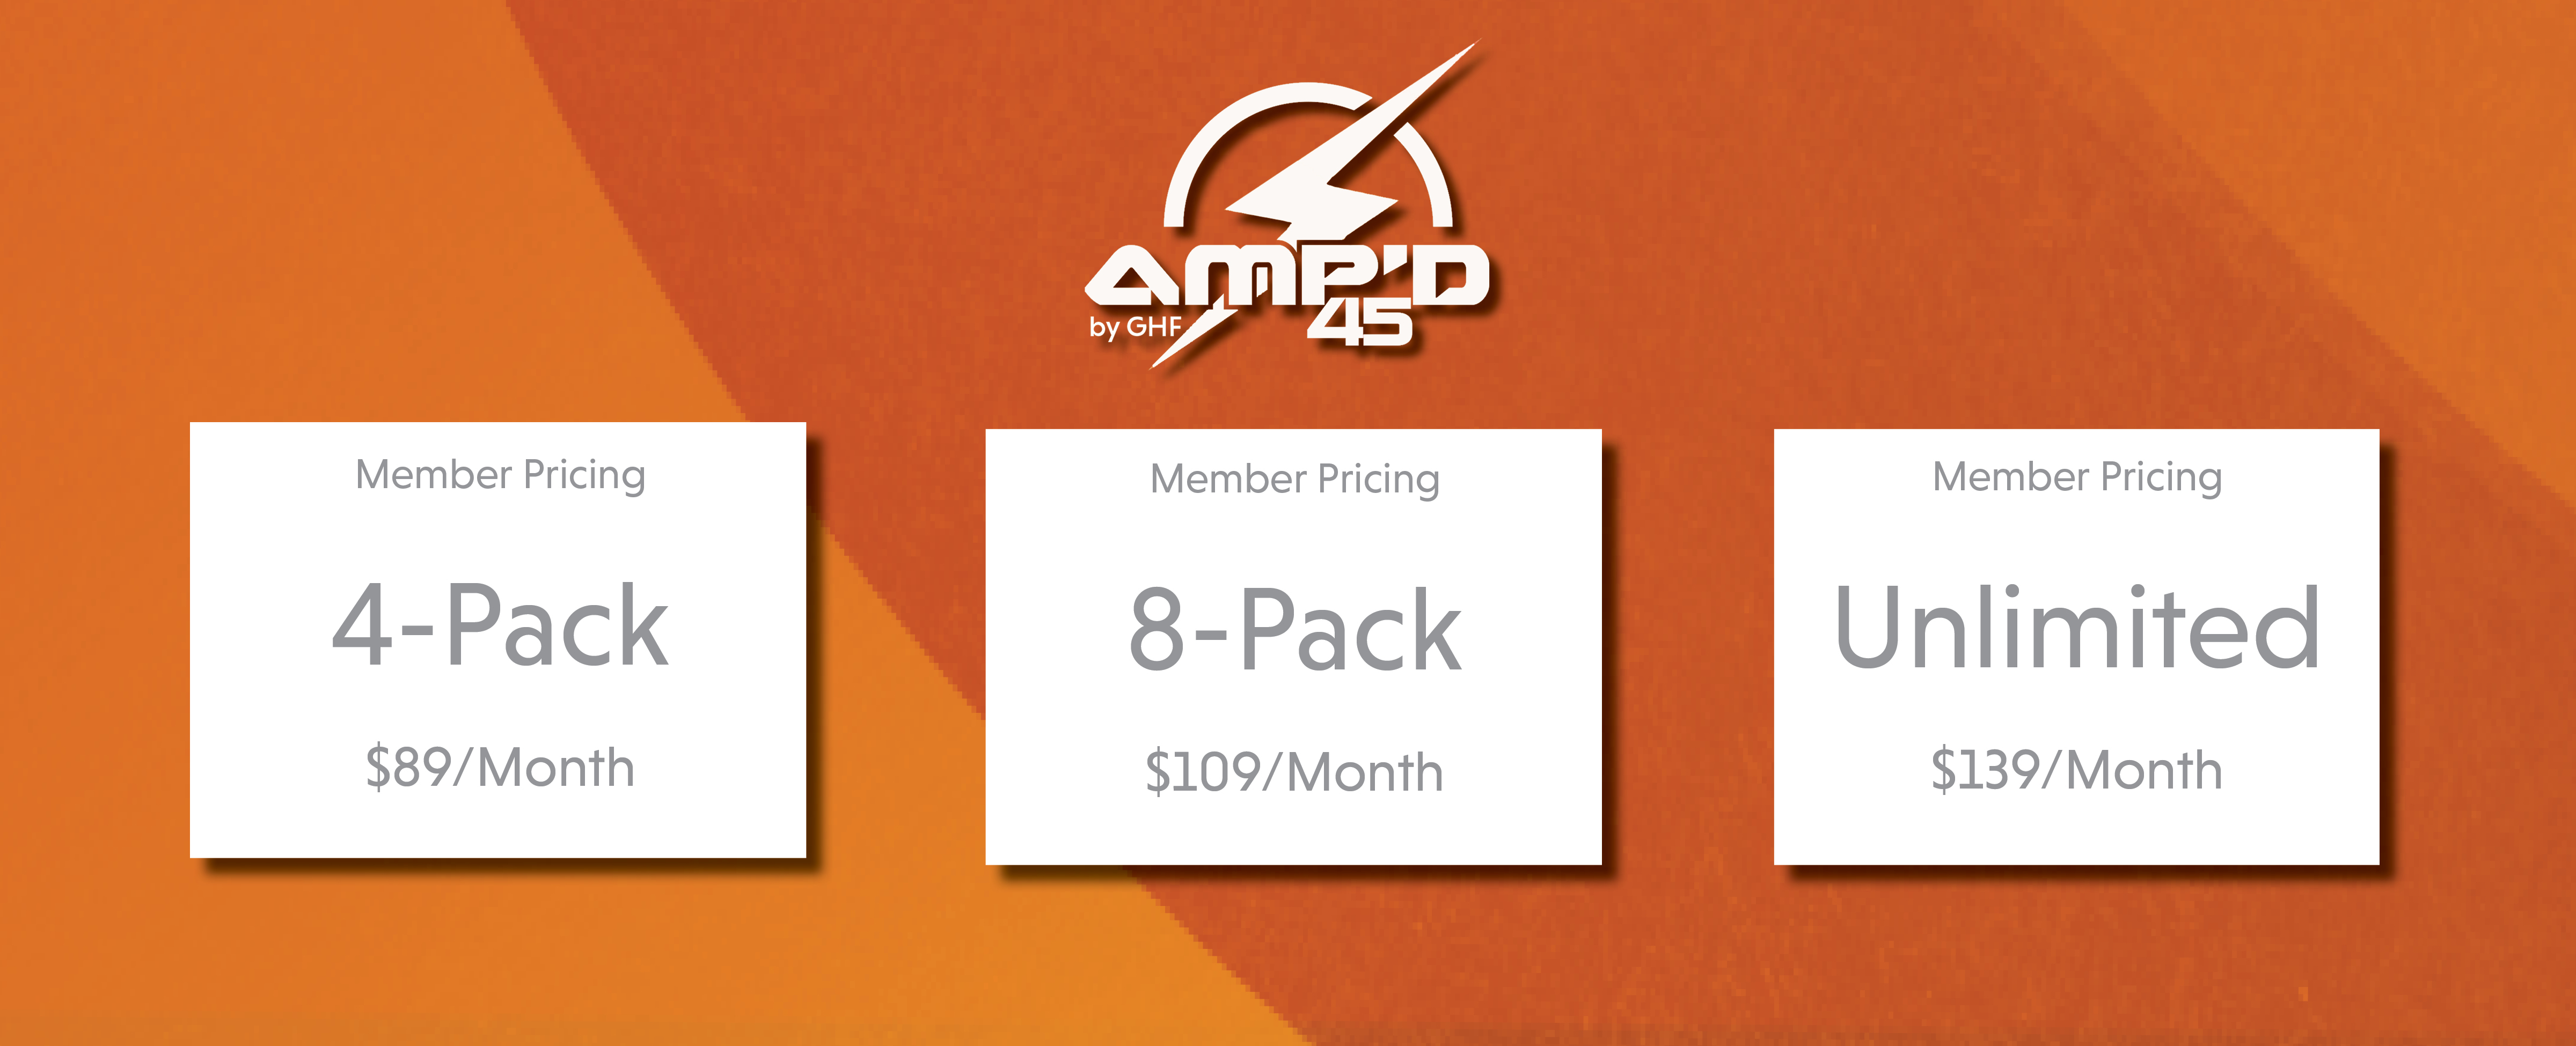 pricing unlimited sessions, 8-pack and 4-pack for AMP'D 45